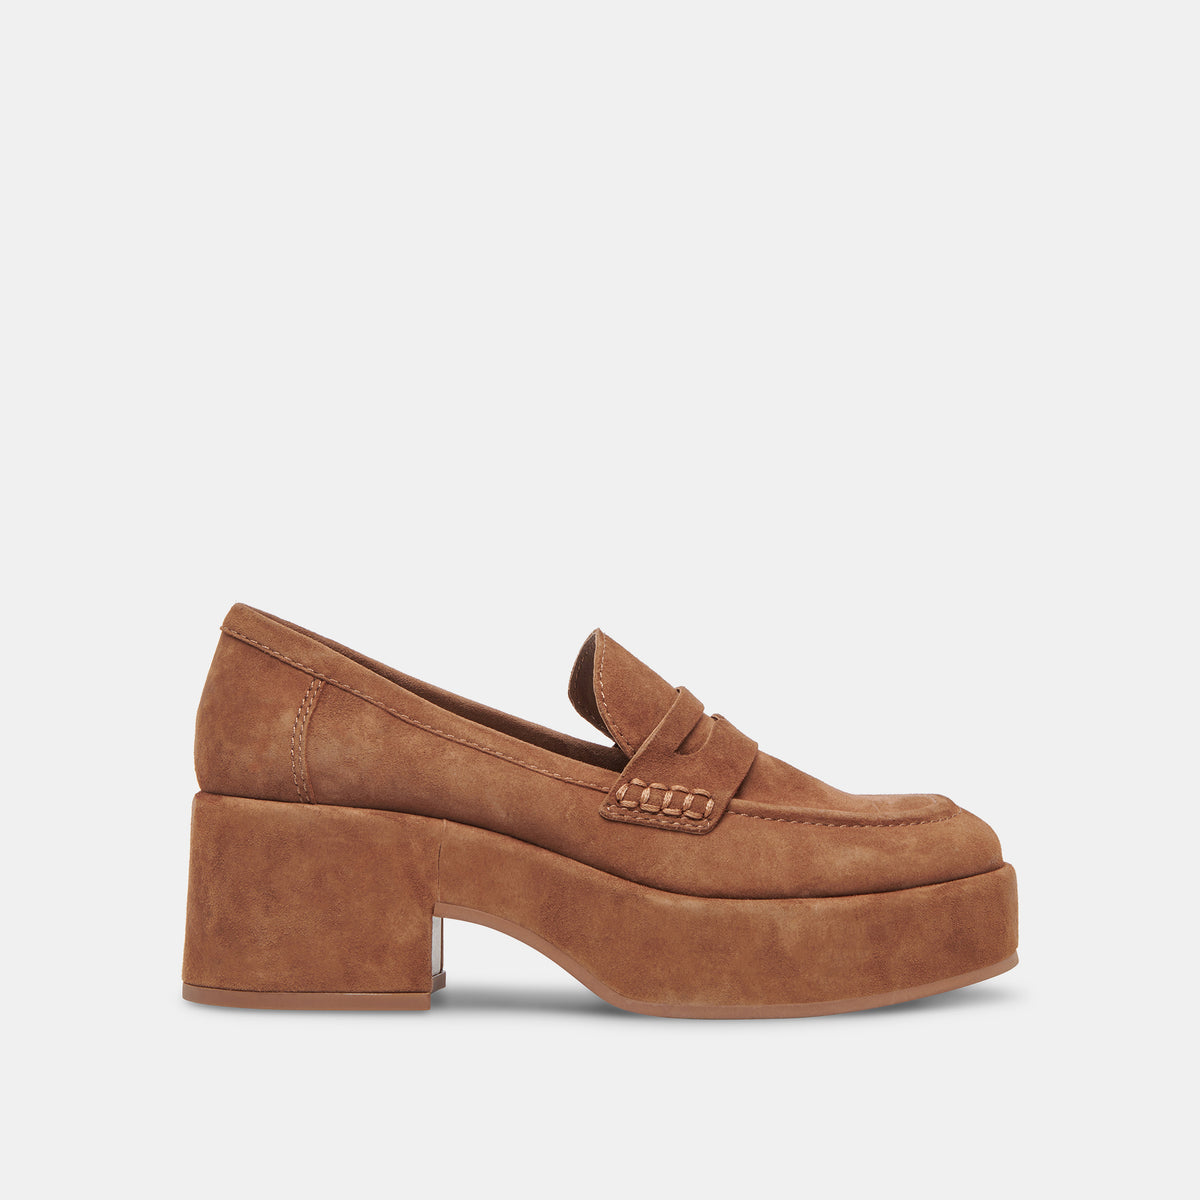 Yanni Loafers Chestnut Suede | Women's Loafers w/ Chunky Heels – Dolce Vita